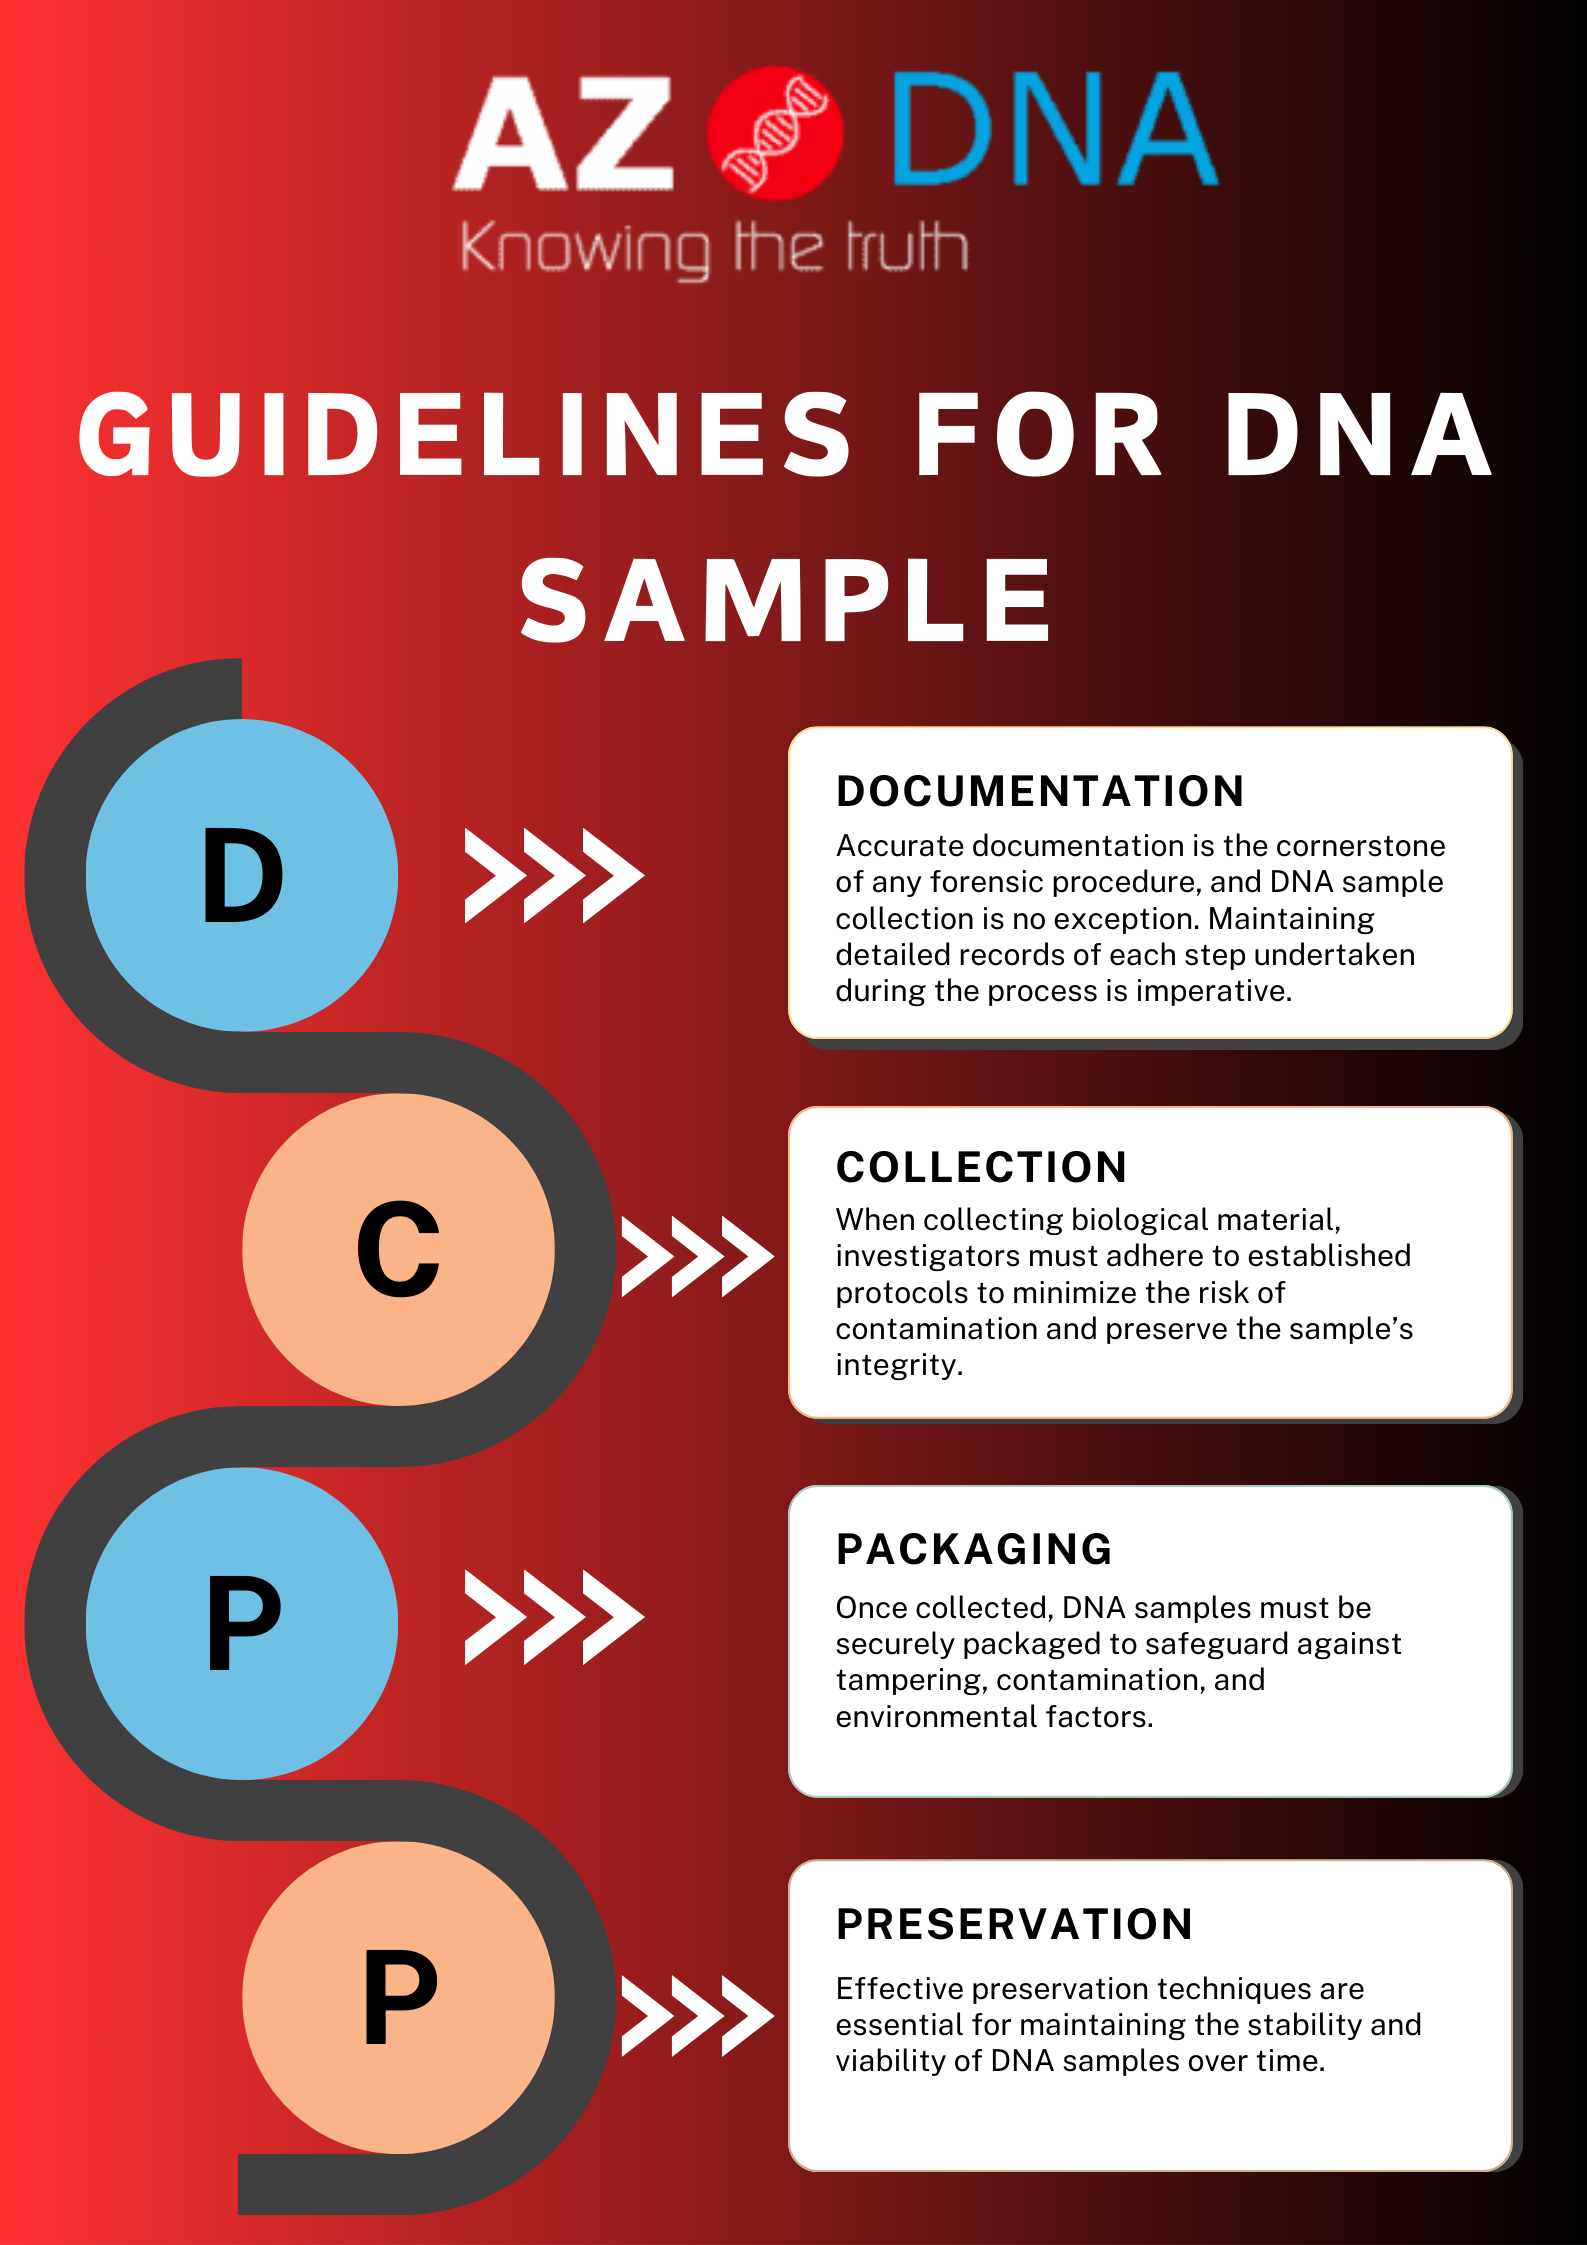 You are currently viewing Guidelines for DNA Sample Documentation, Collection, Packaging, and Preservation